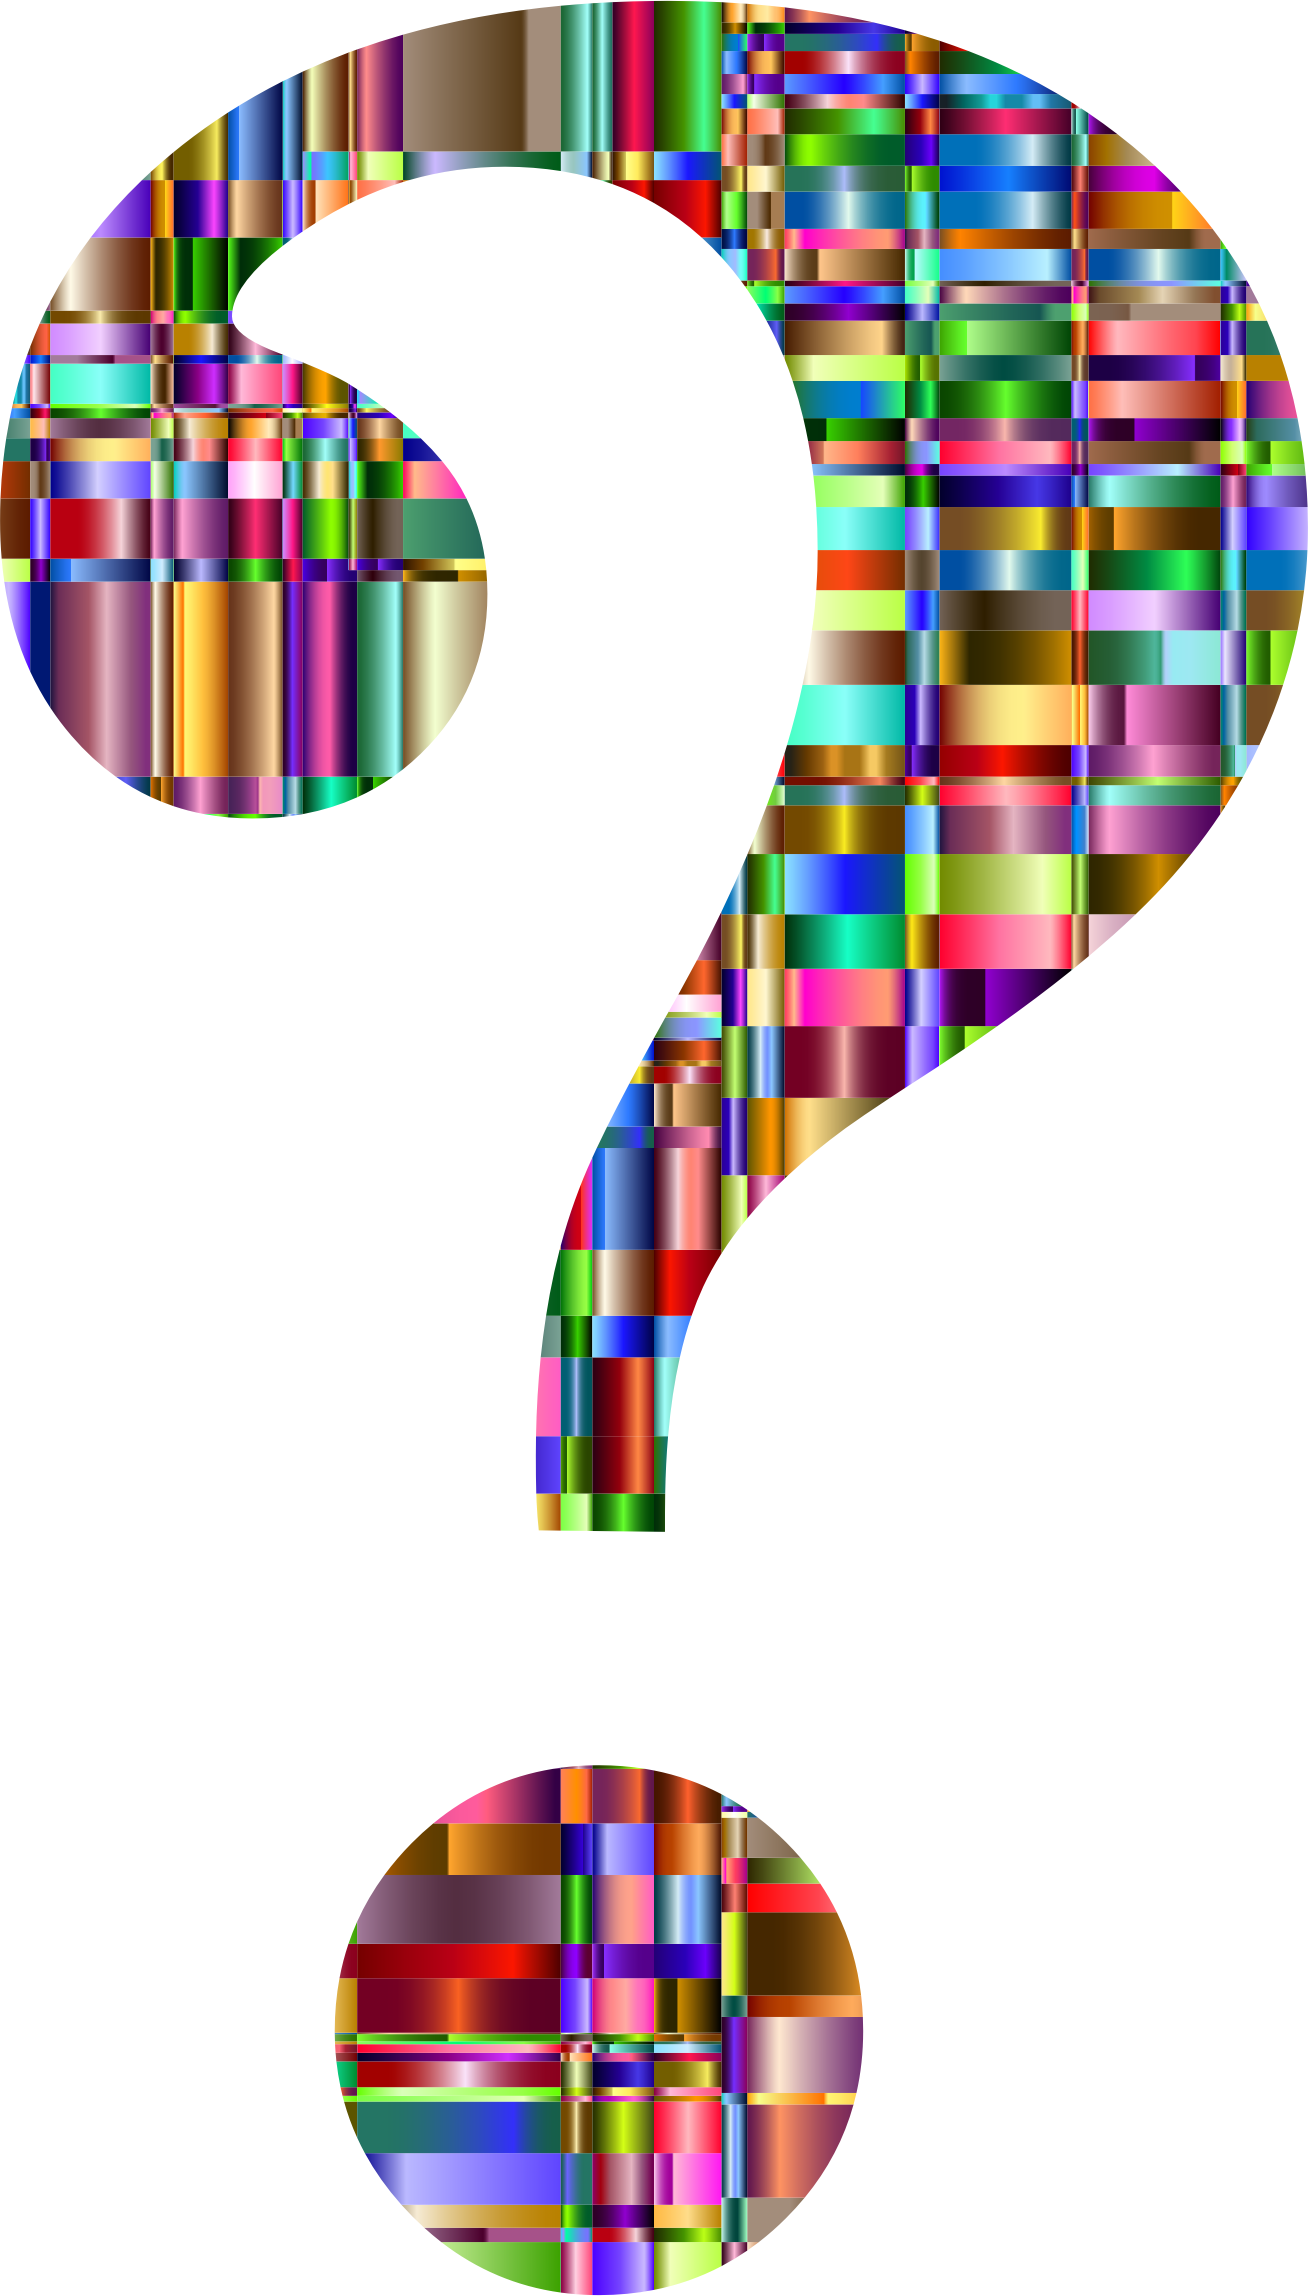 clipart of a question mark - photo #42